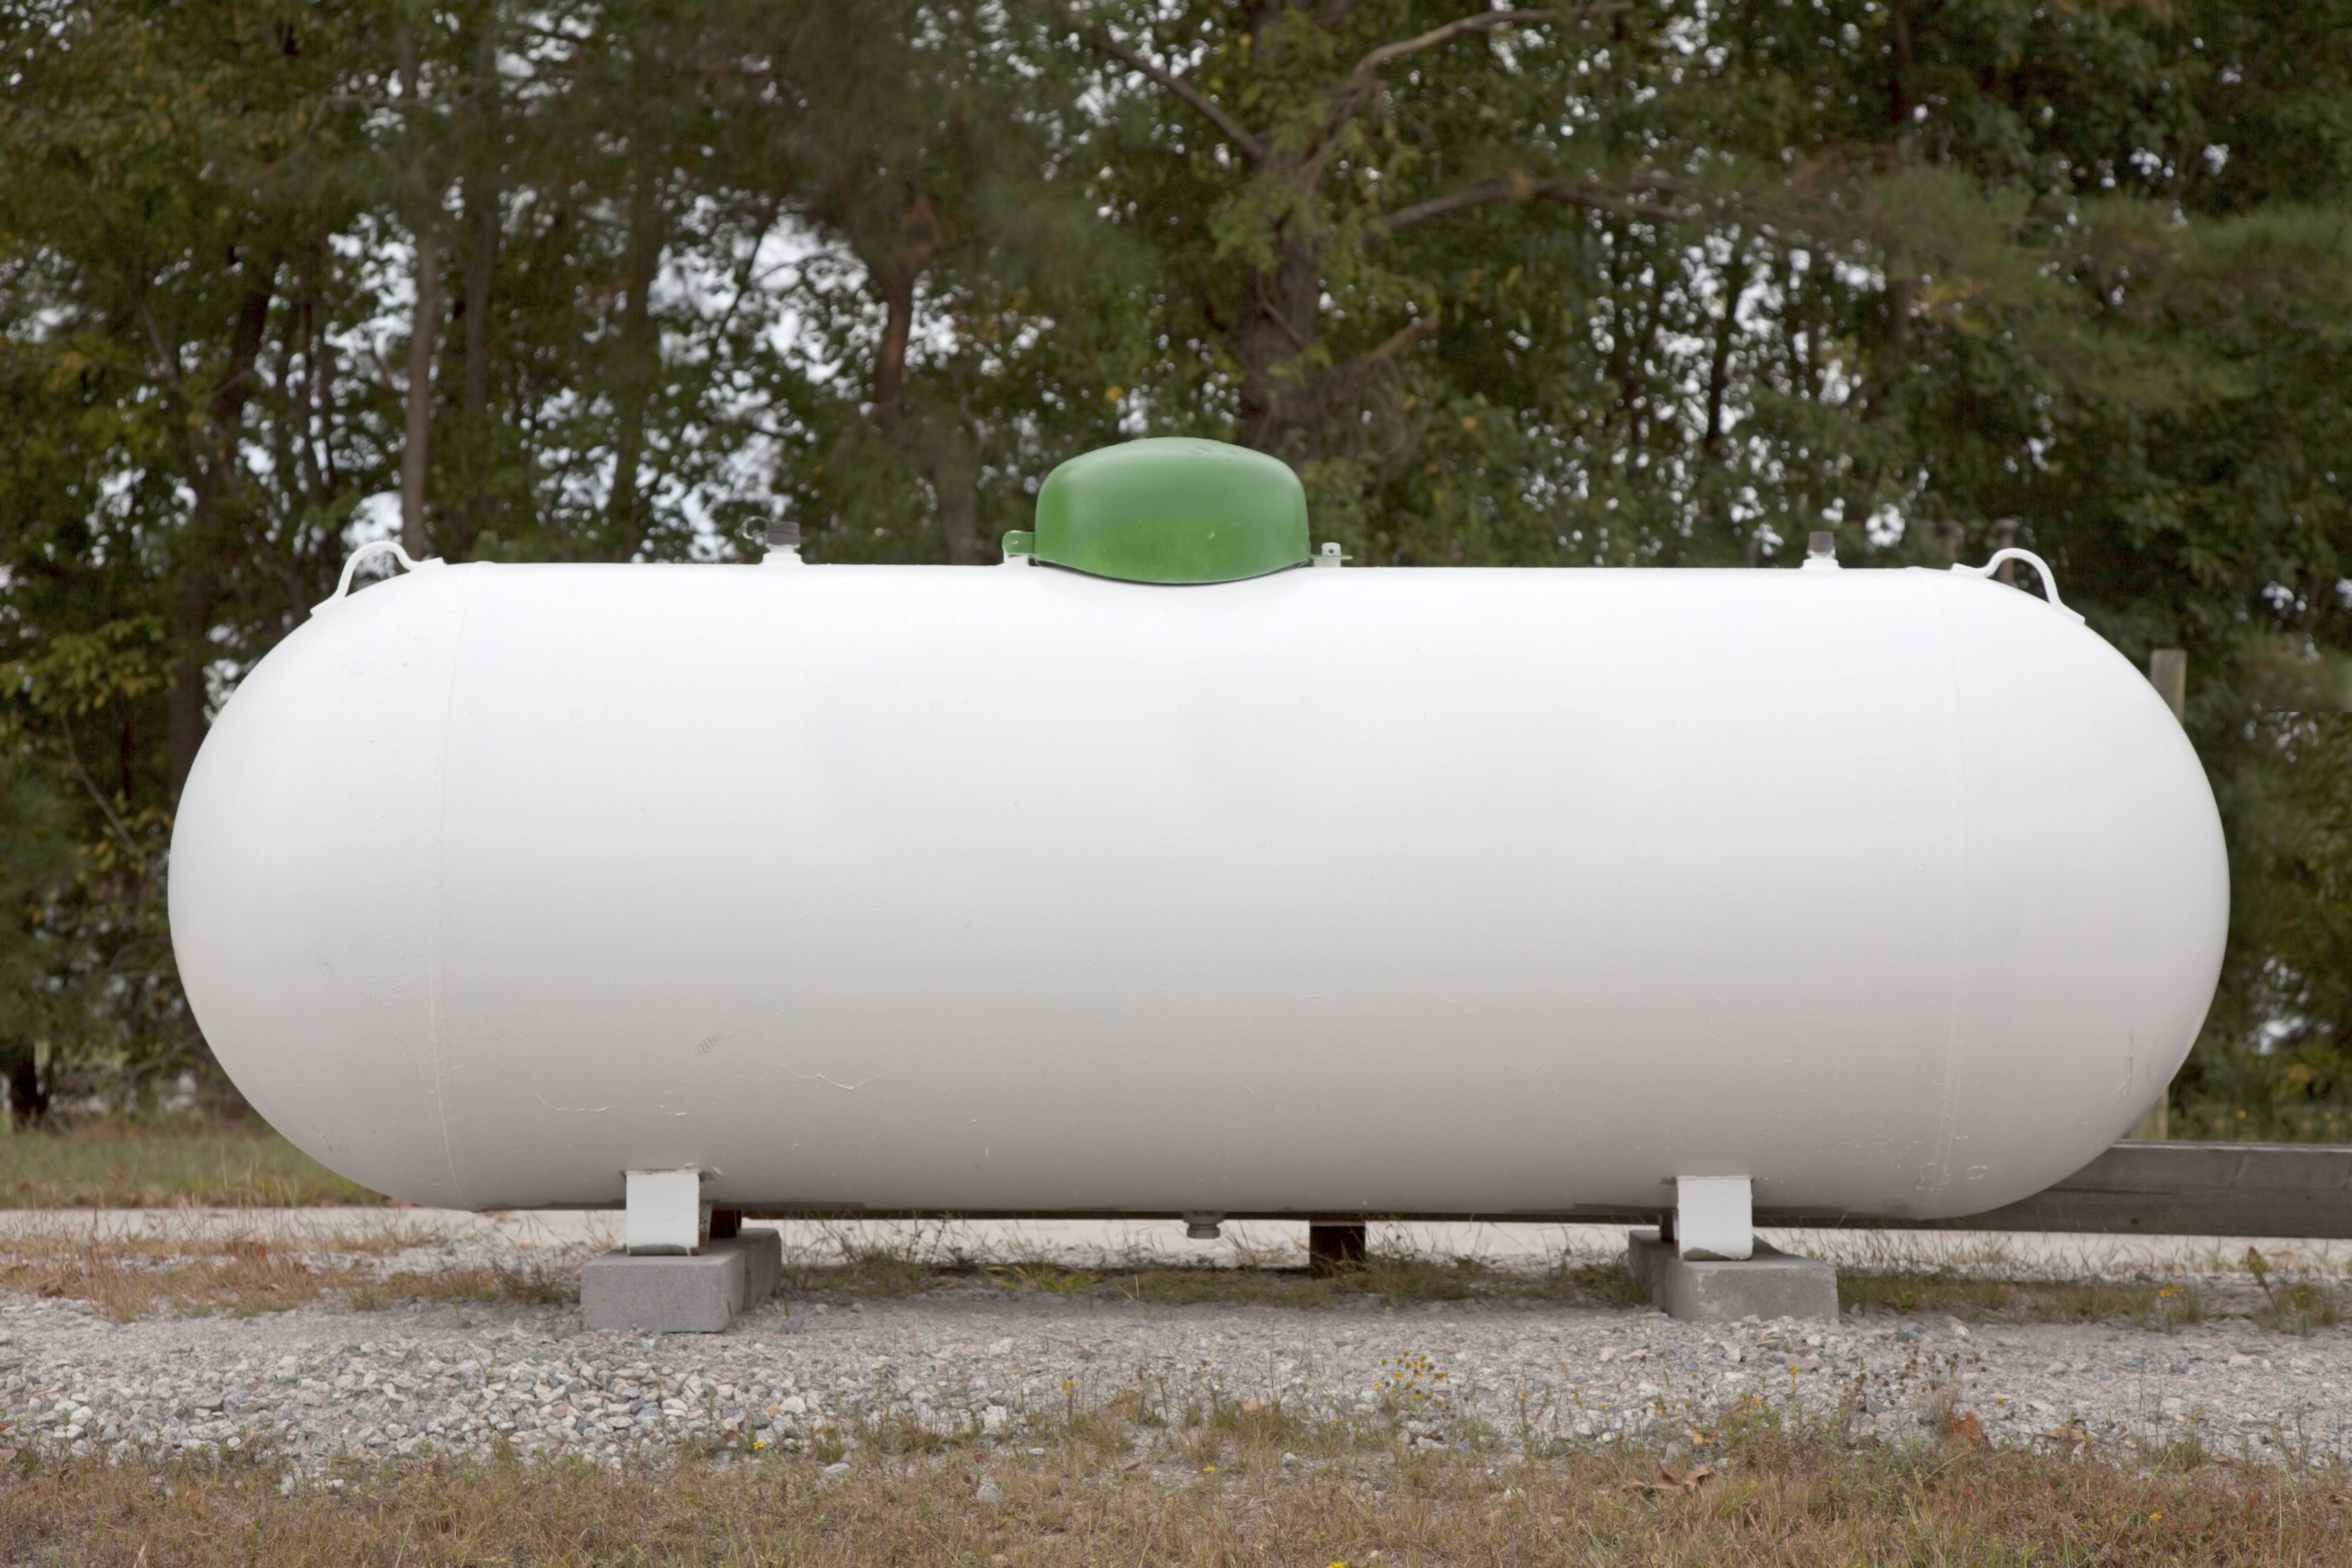 Propane's Demand Season Went Smooth, Stays Affordable